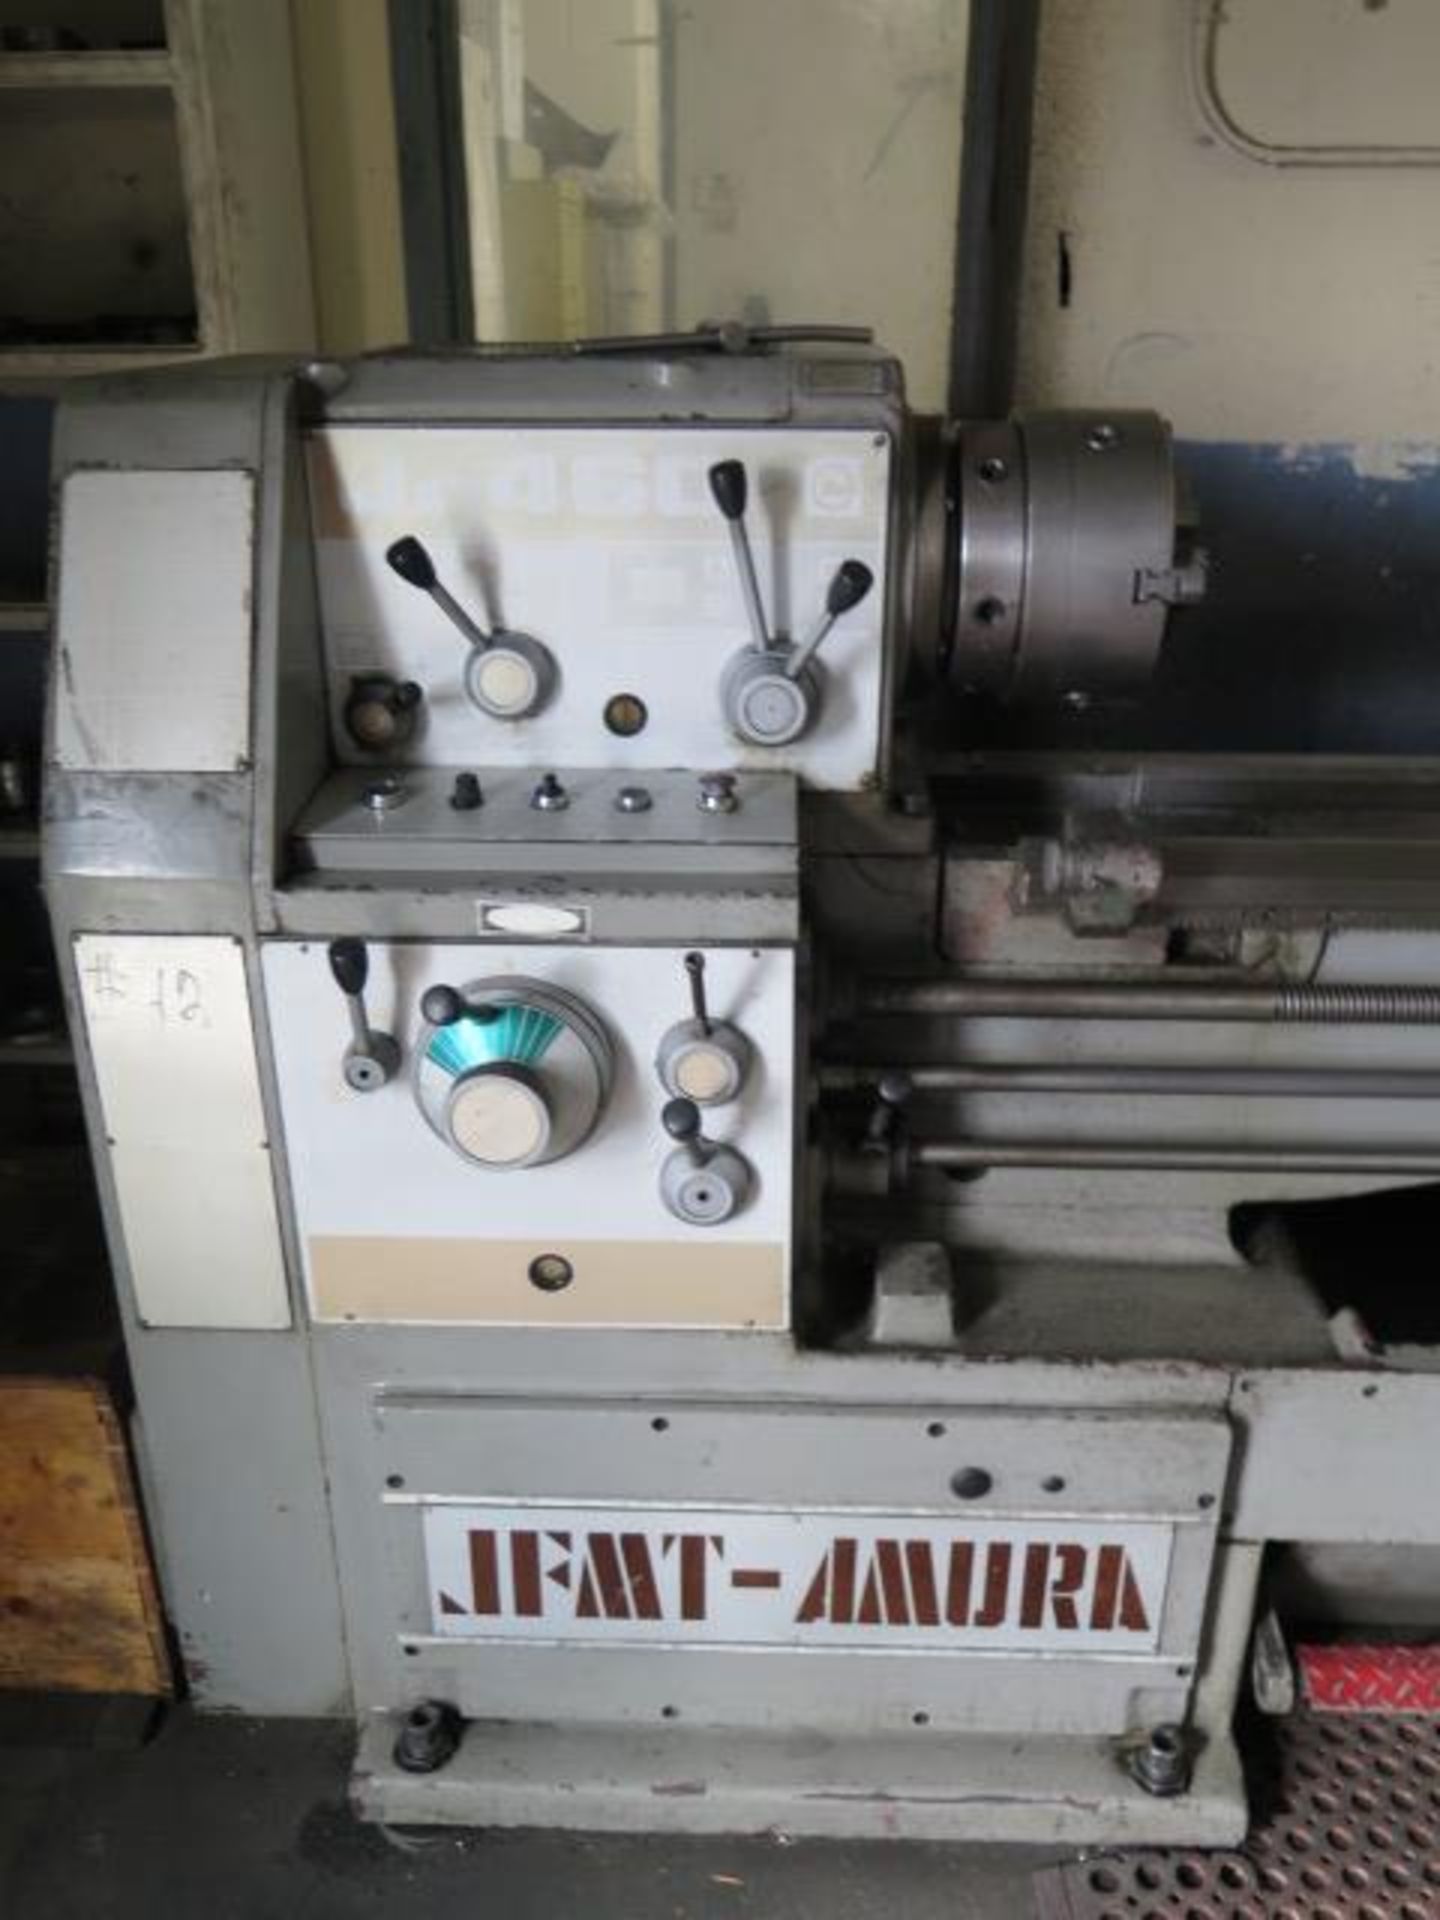 JFMT-Amura 18” x 60” geared Head Gap Bed Lathe s/n 768 w/ 30-1250 RPM, Inch/mm Threading, SOLD AS IS - Image 4 of 13